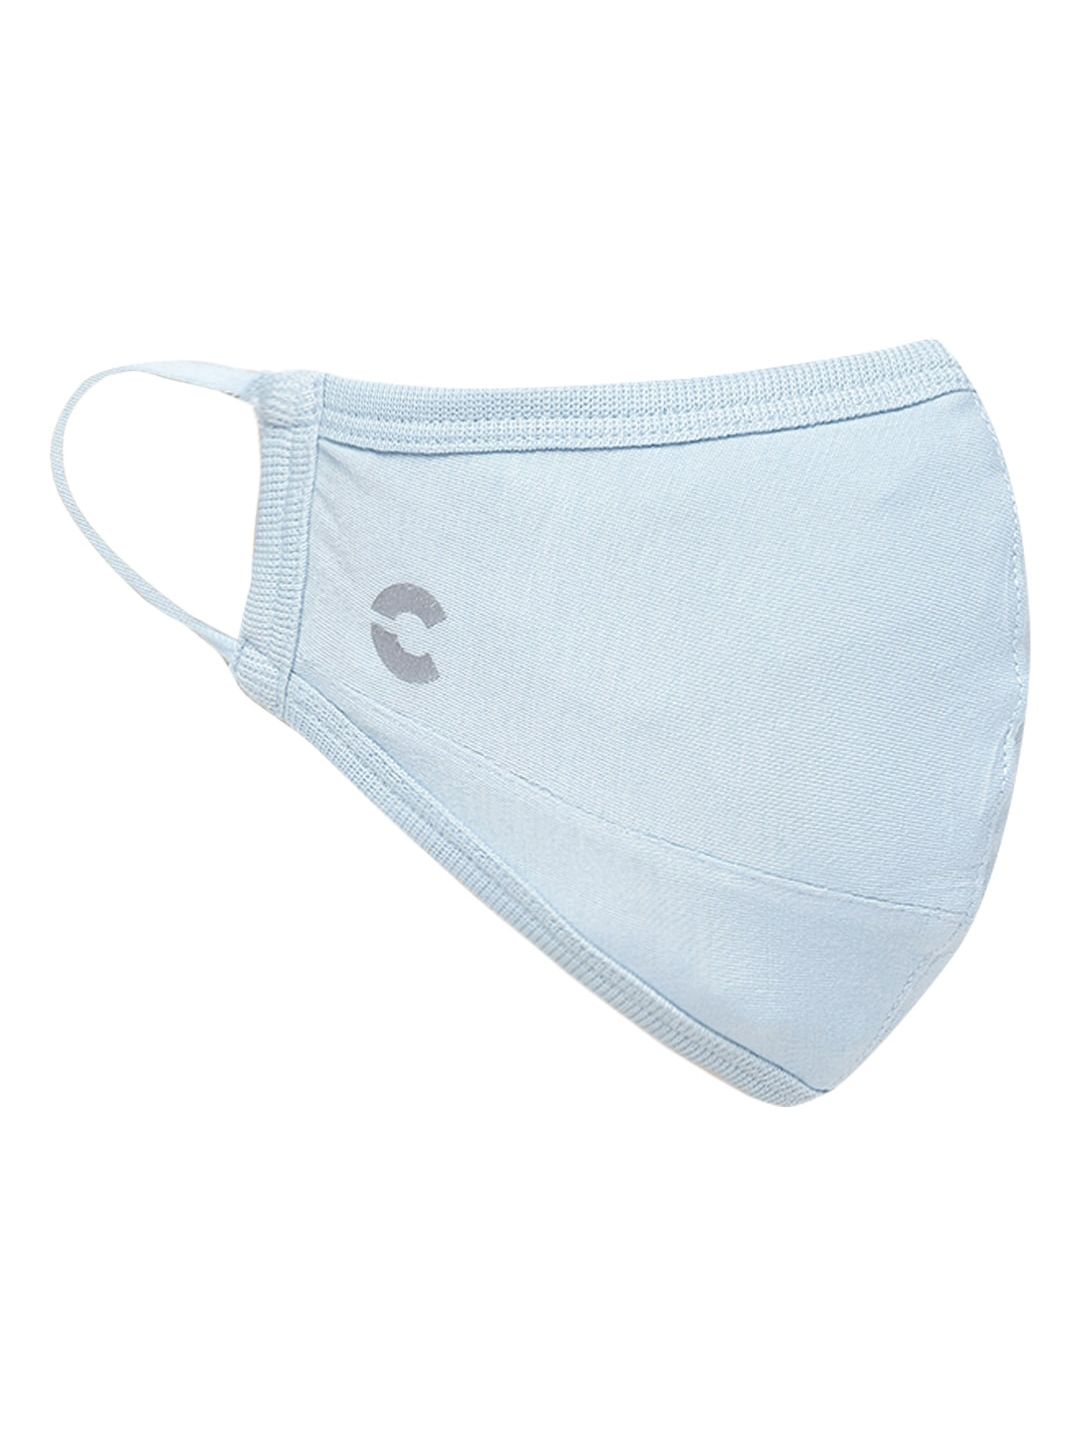 FREECULTR Blue Solid Anti Microbial Bamboo Cloth Mask Price in India